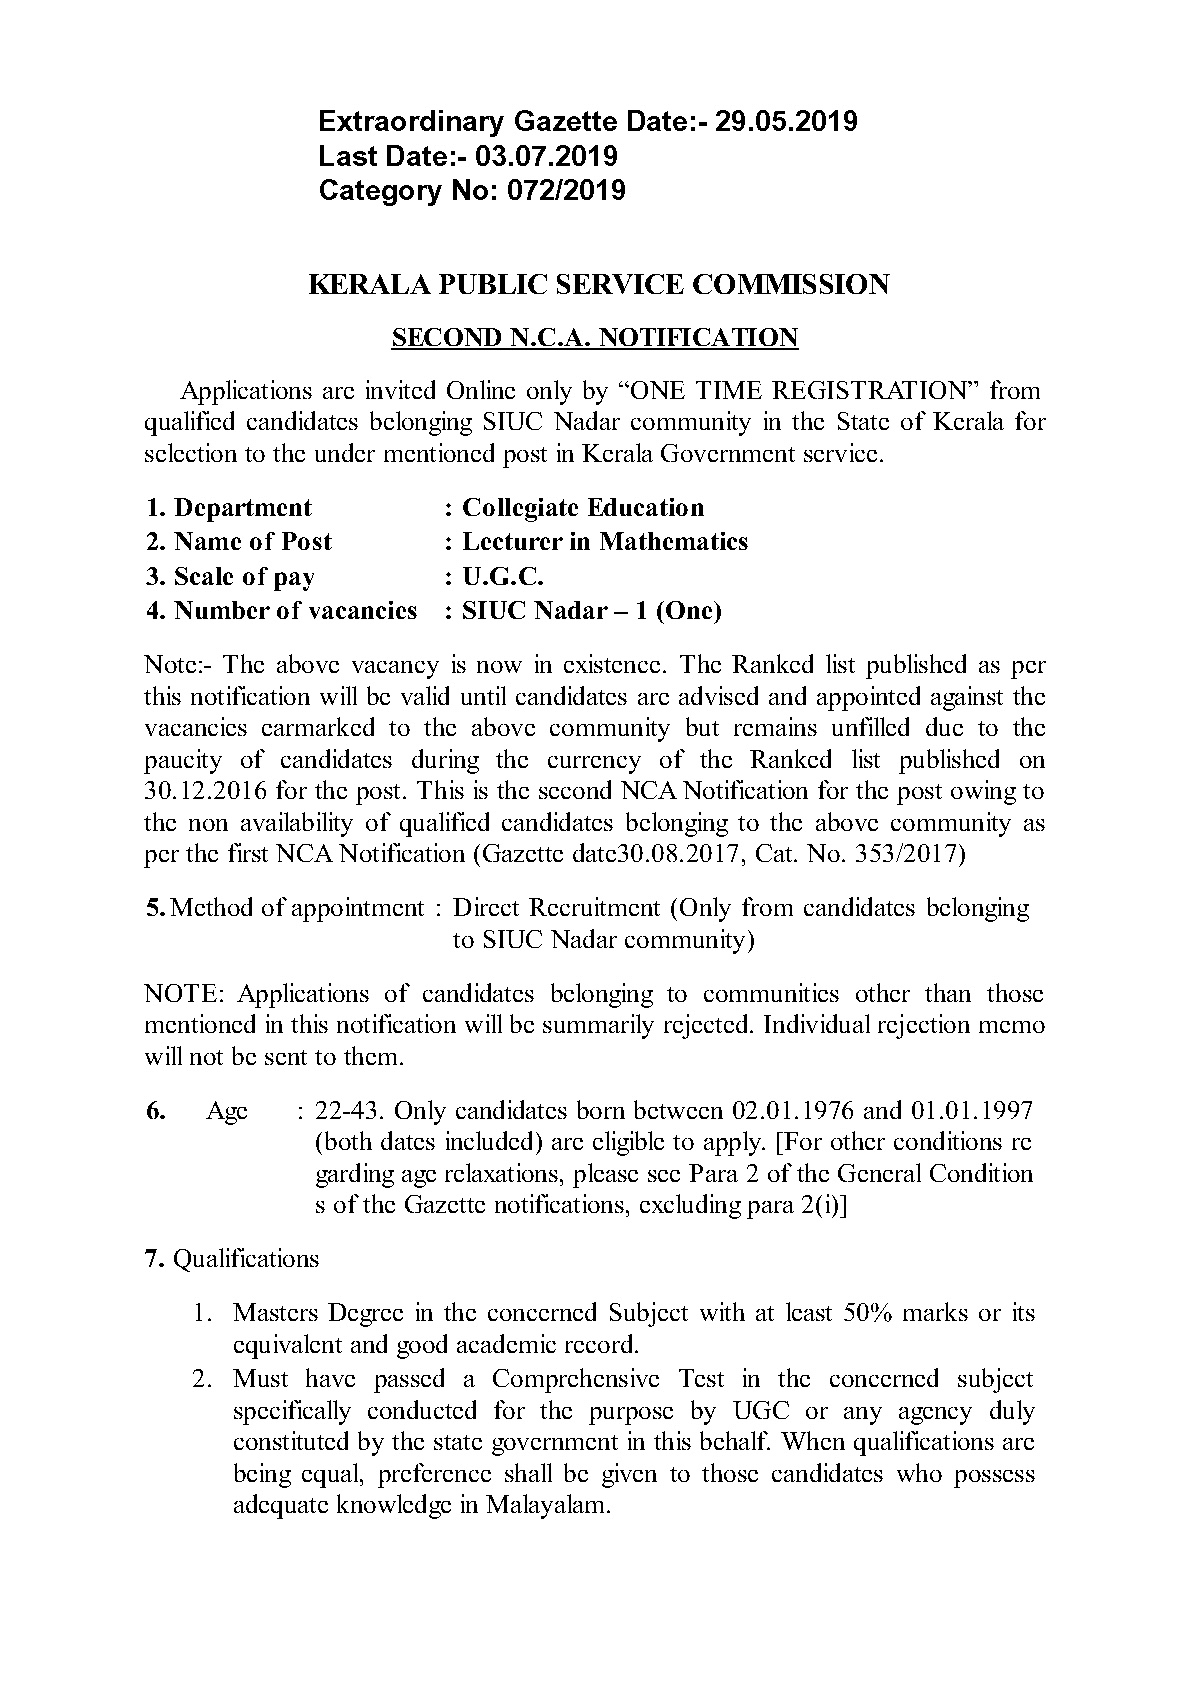 KPSC Lecturer in Mathematics Application from SIUC Nadar - Notification Image 1